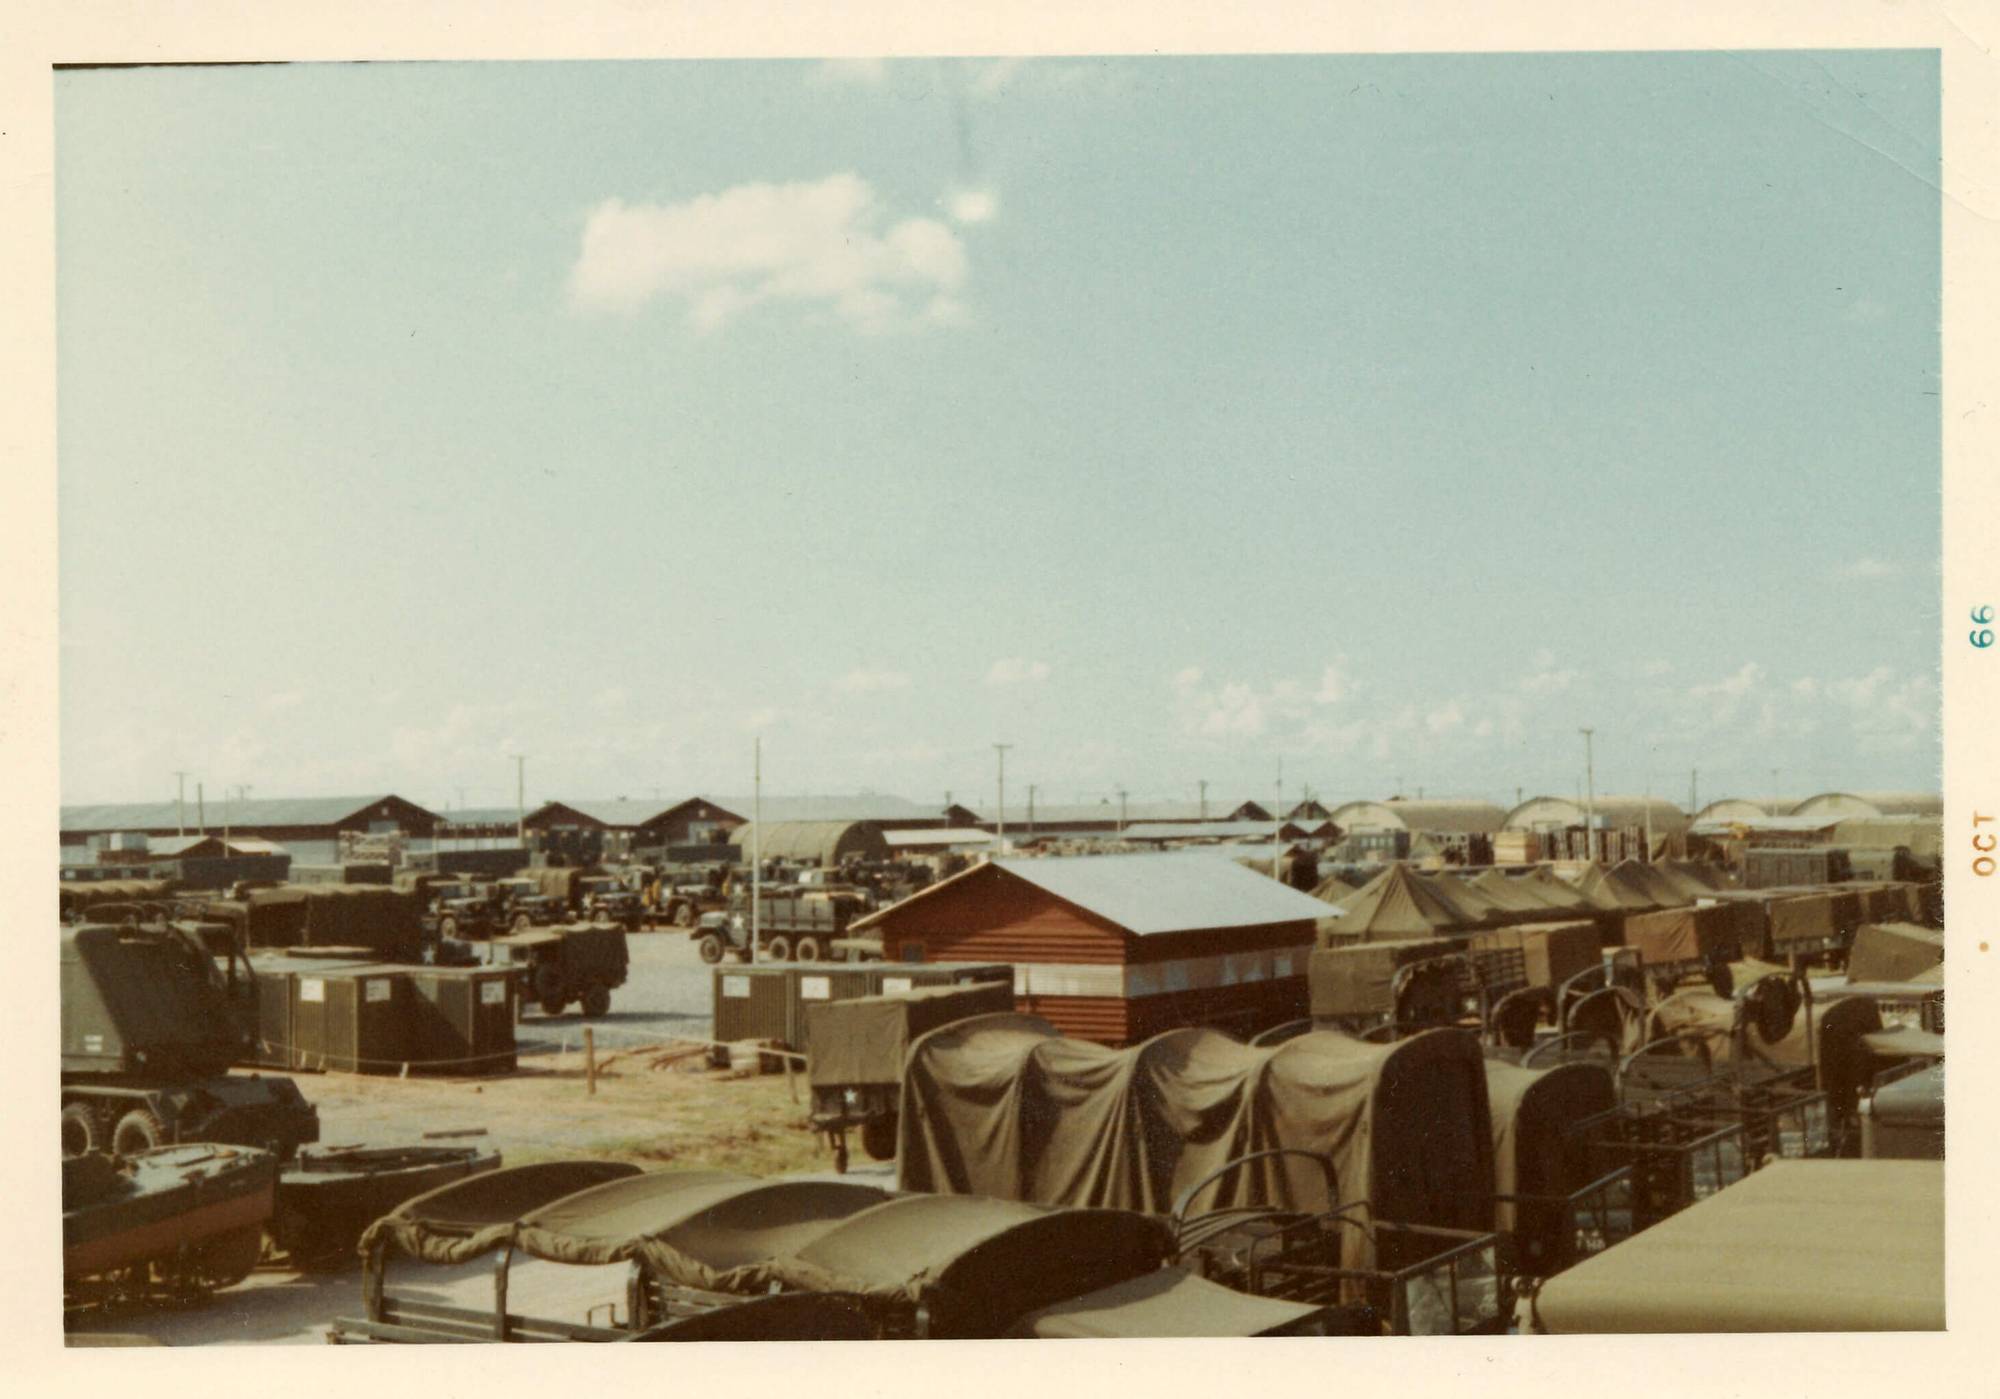 An encampment. Margins indicate the photo is from October 1966.